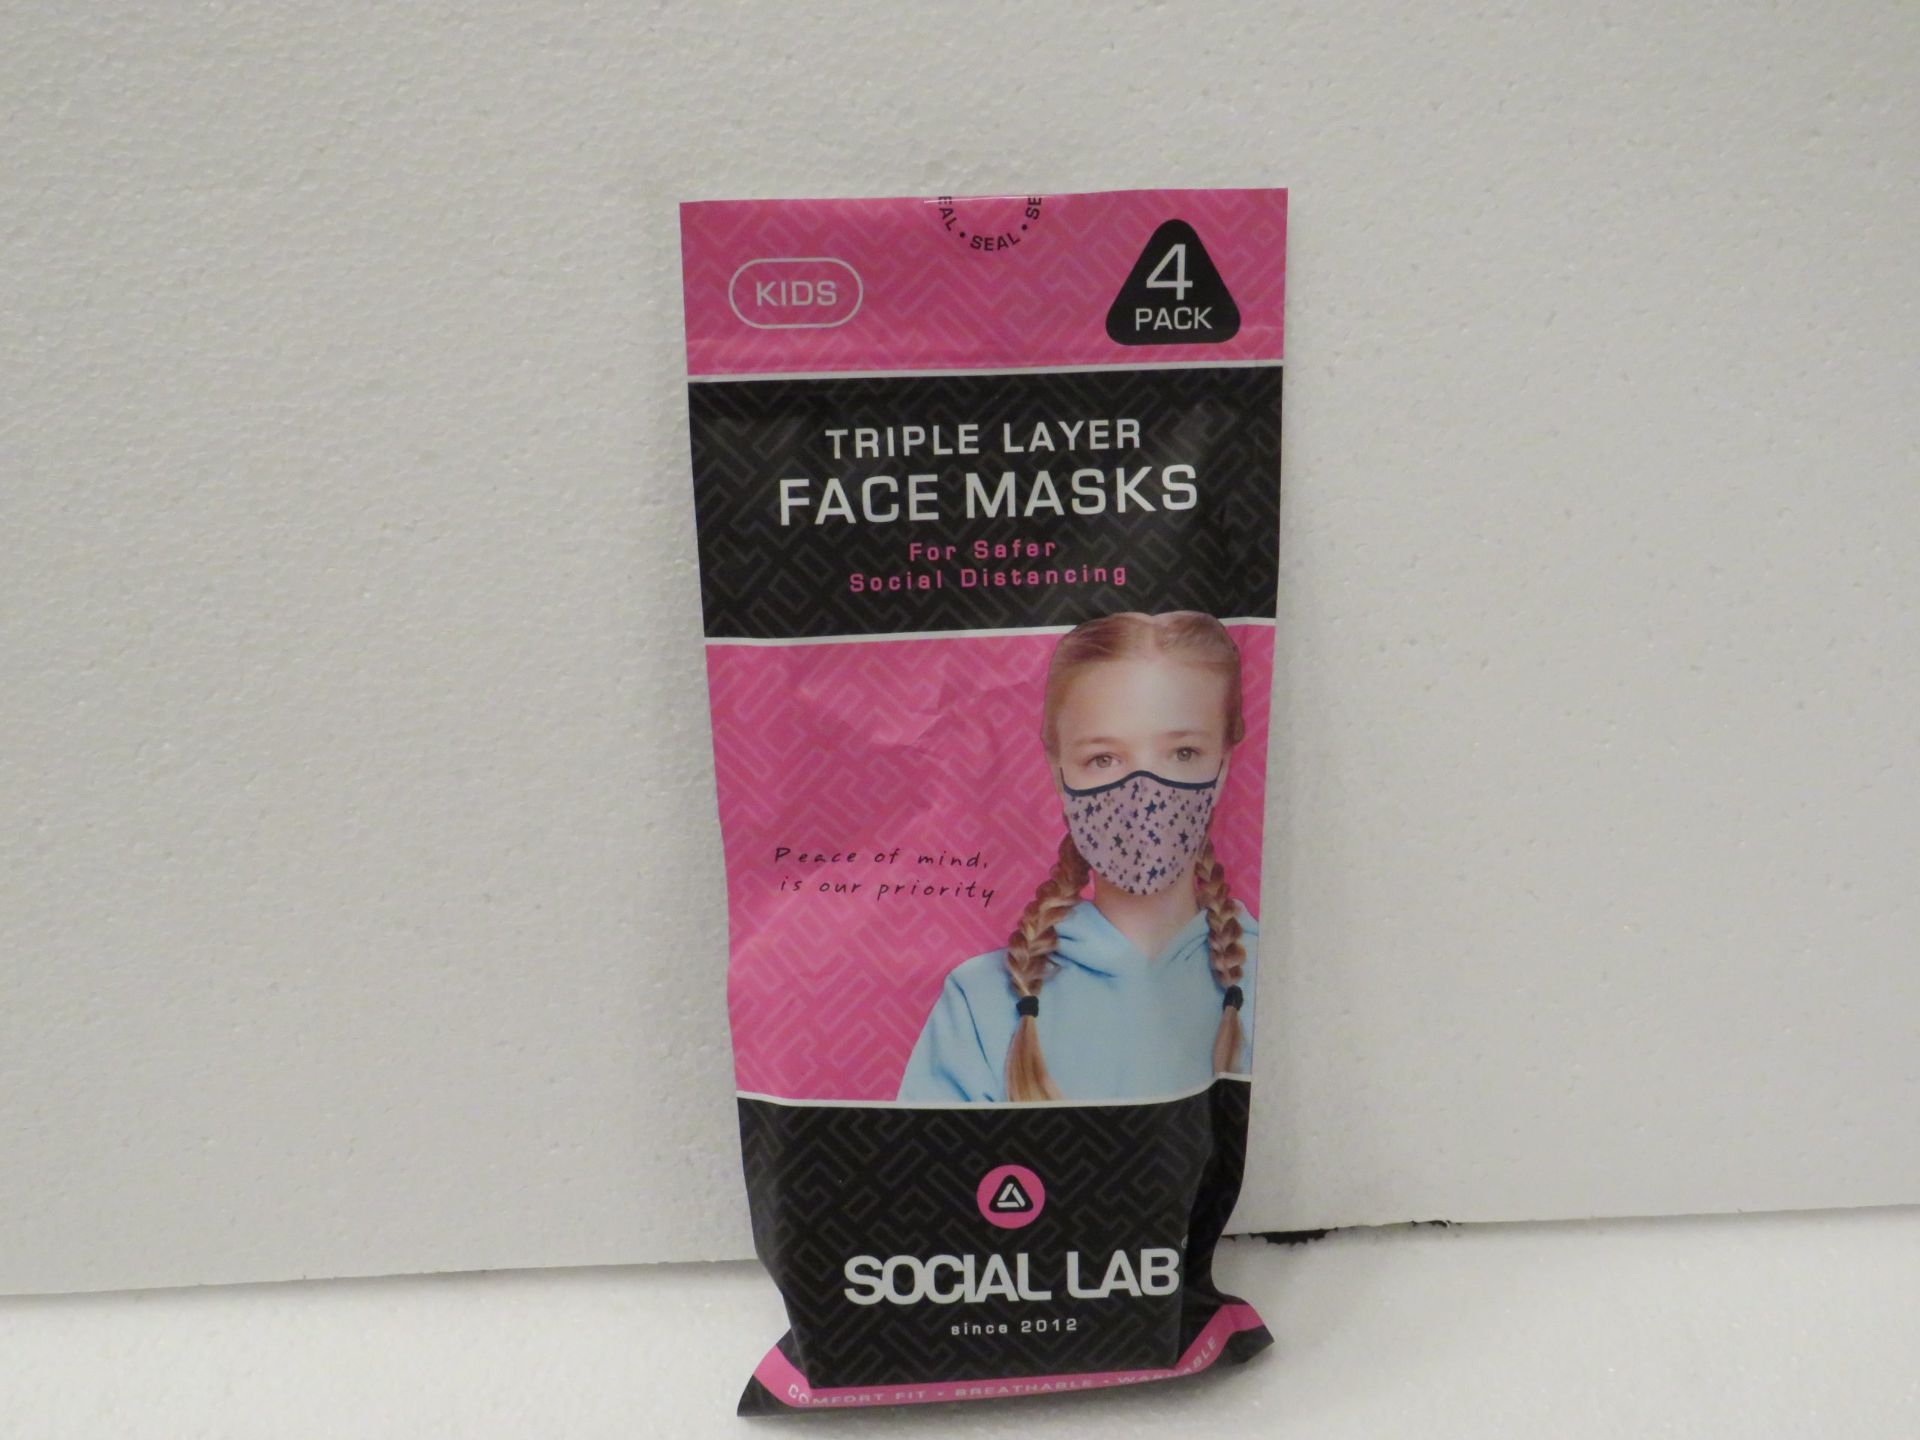 2x Social Lab triple layer face masks for kids, pink